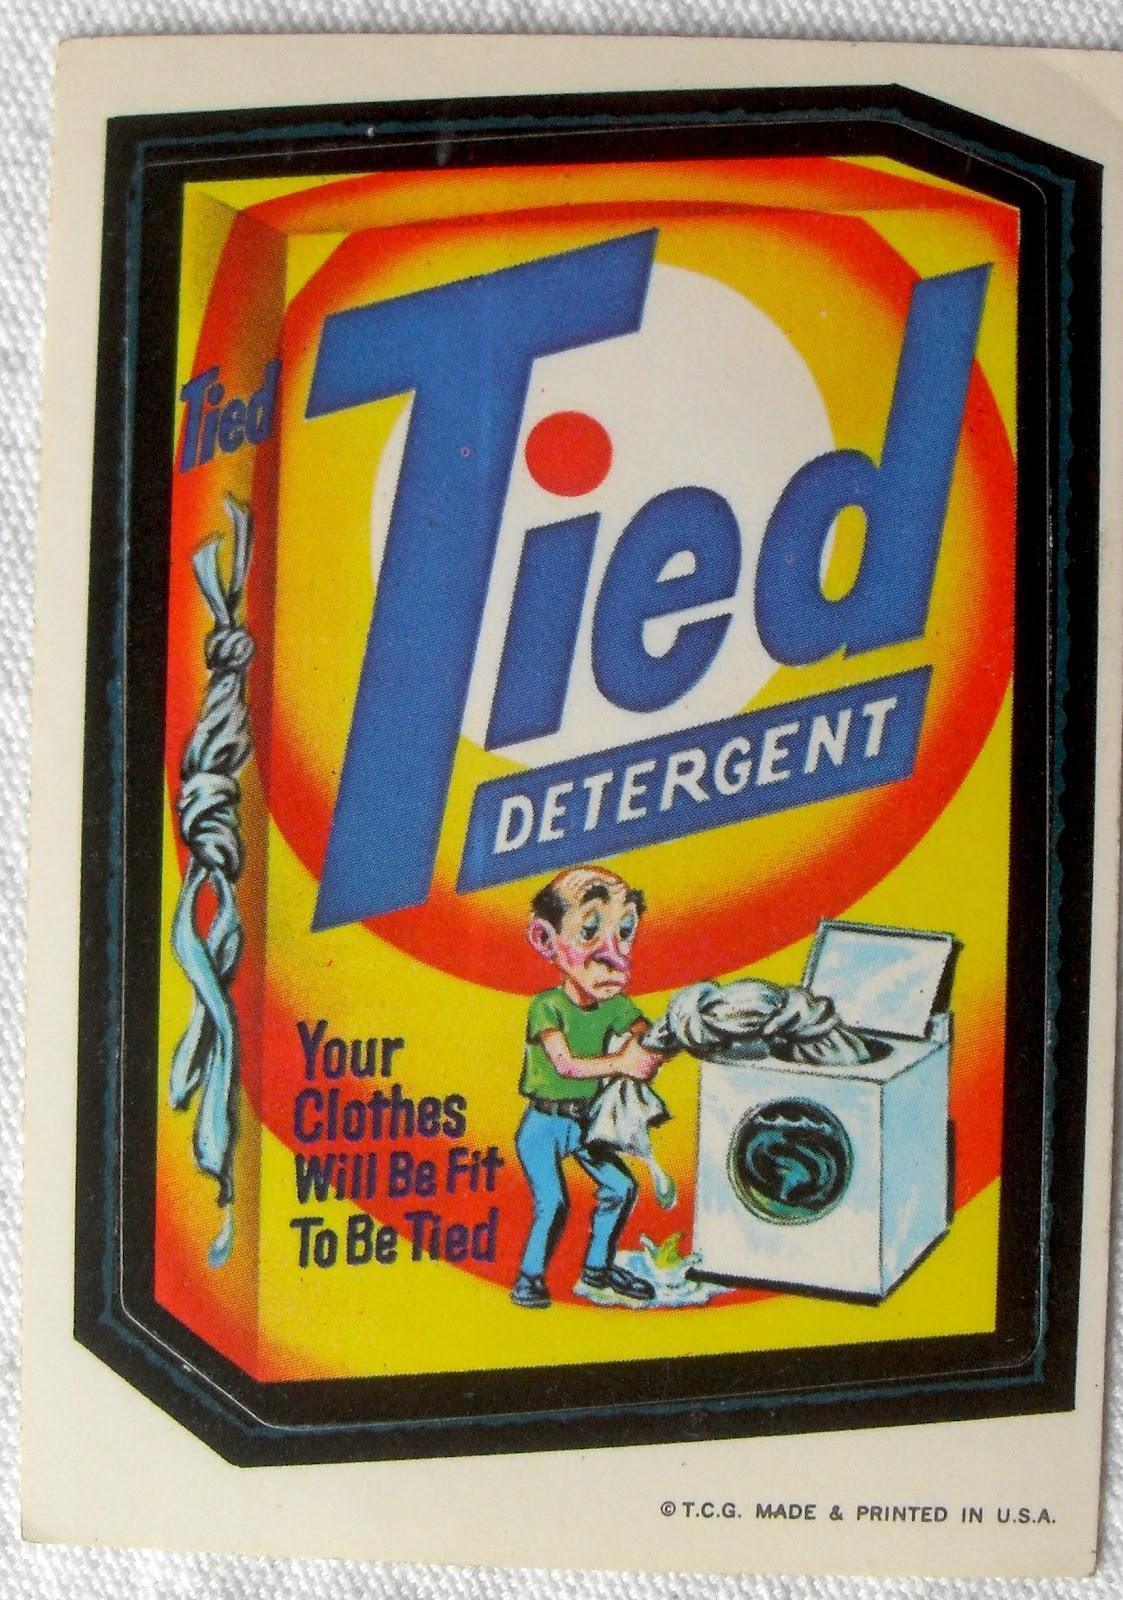 wacky packages 1970s - pal Detergent Your Clothes Will Be Fit To Be Tied T.C.G. Made & Printed In U.S.A.